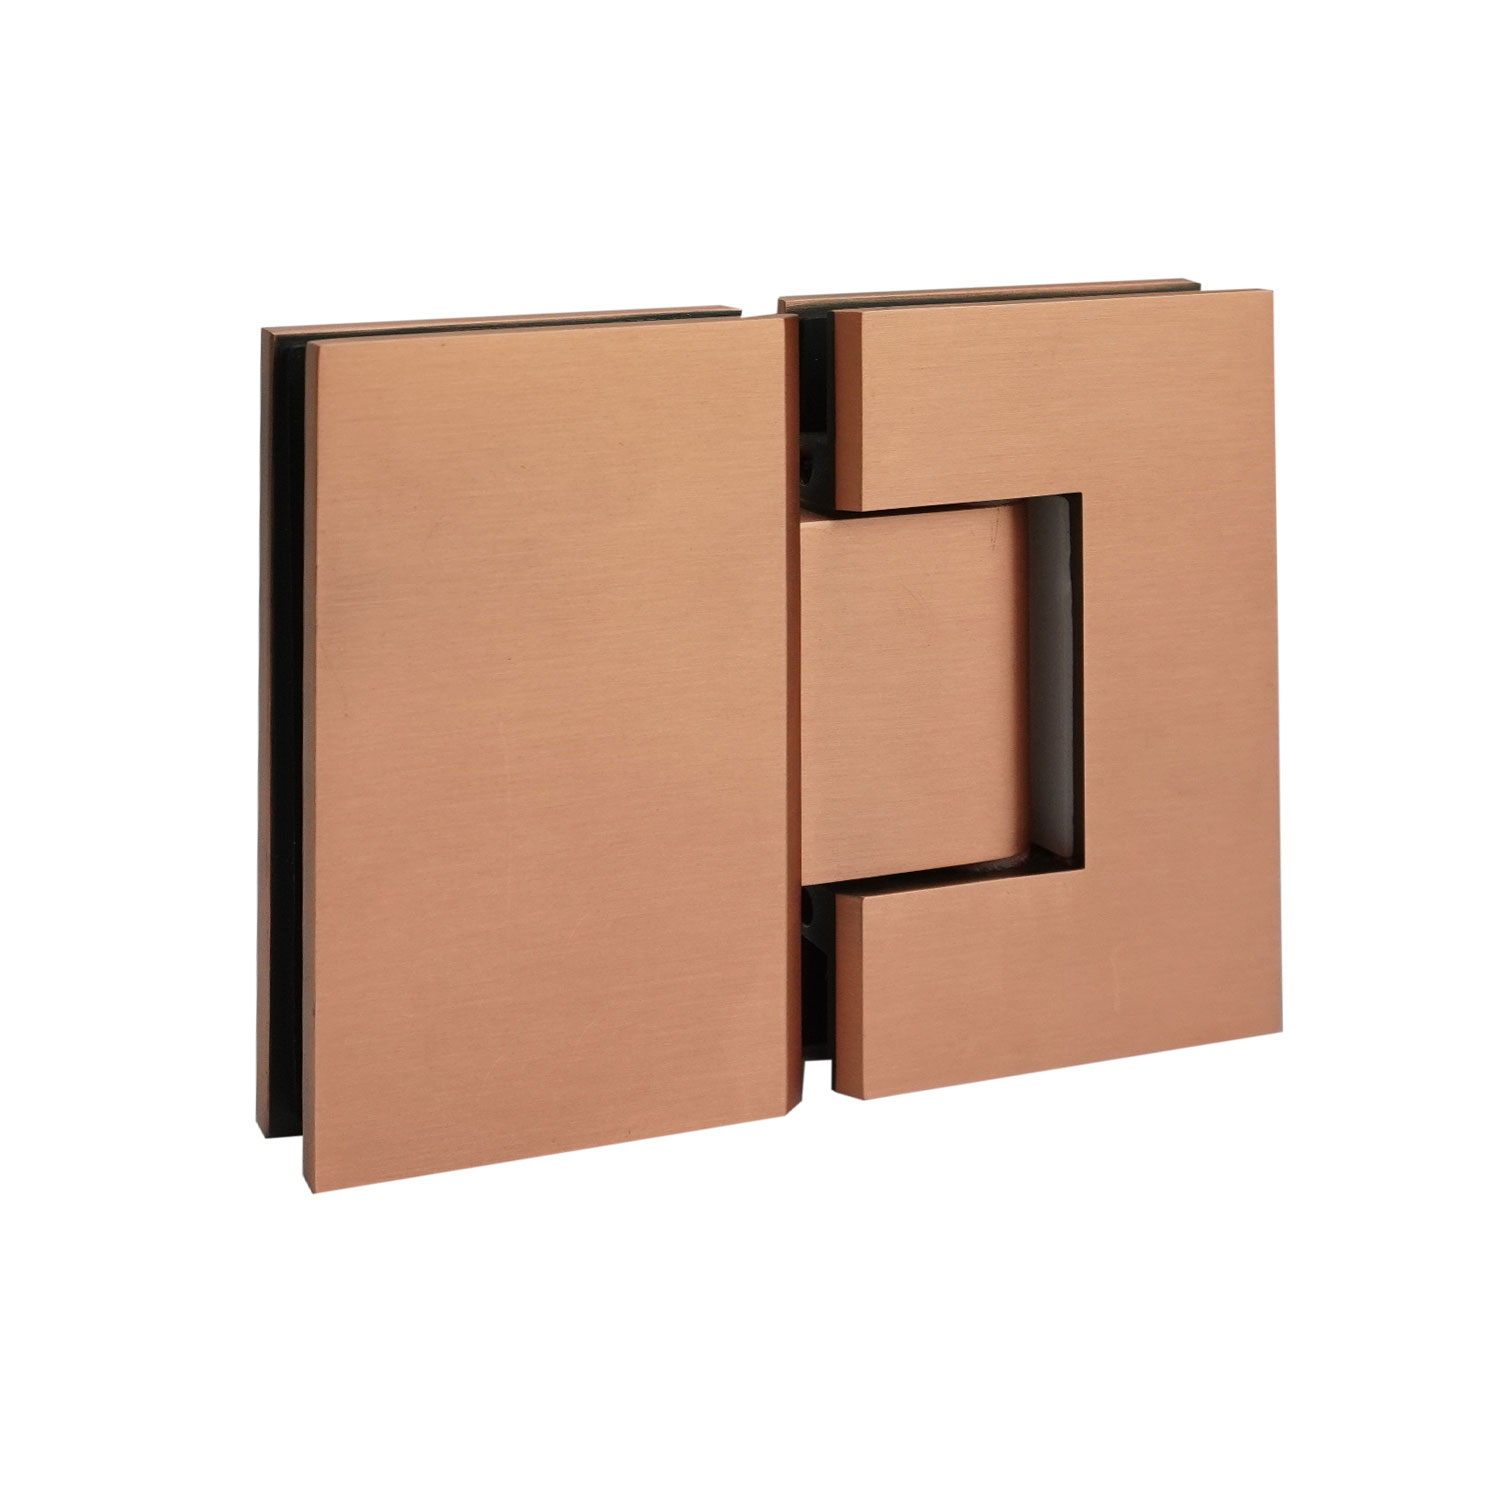 SHOWER SCREEN HINGE GLASS TO GLASS 180 DEG. SQUARE SERIES (Brushed Copper)